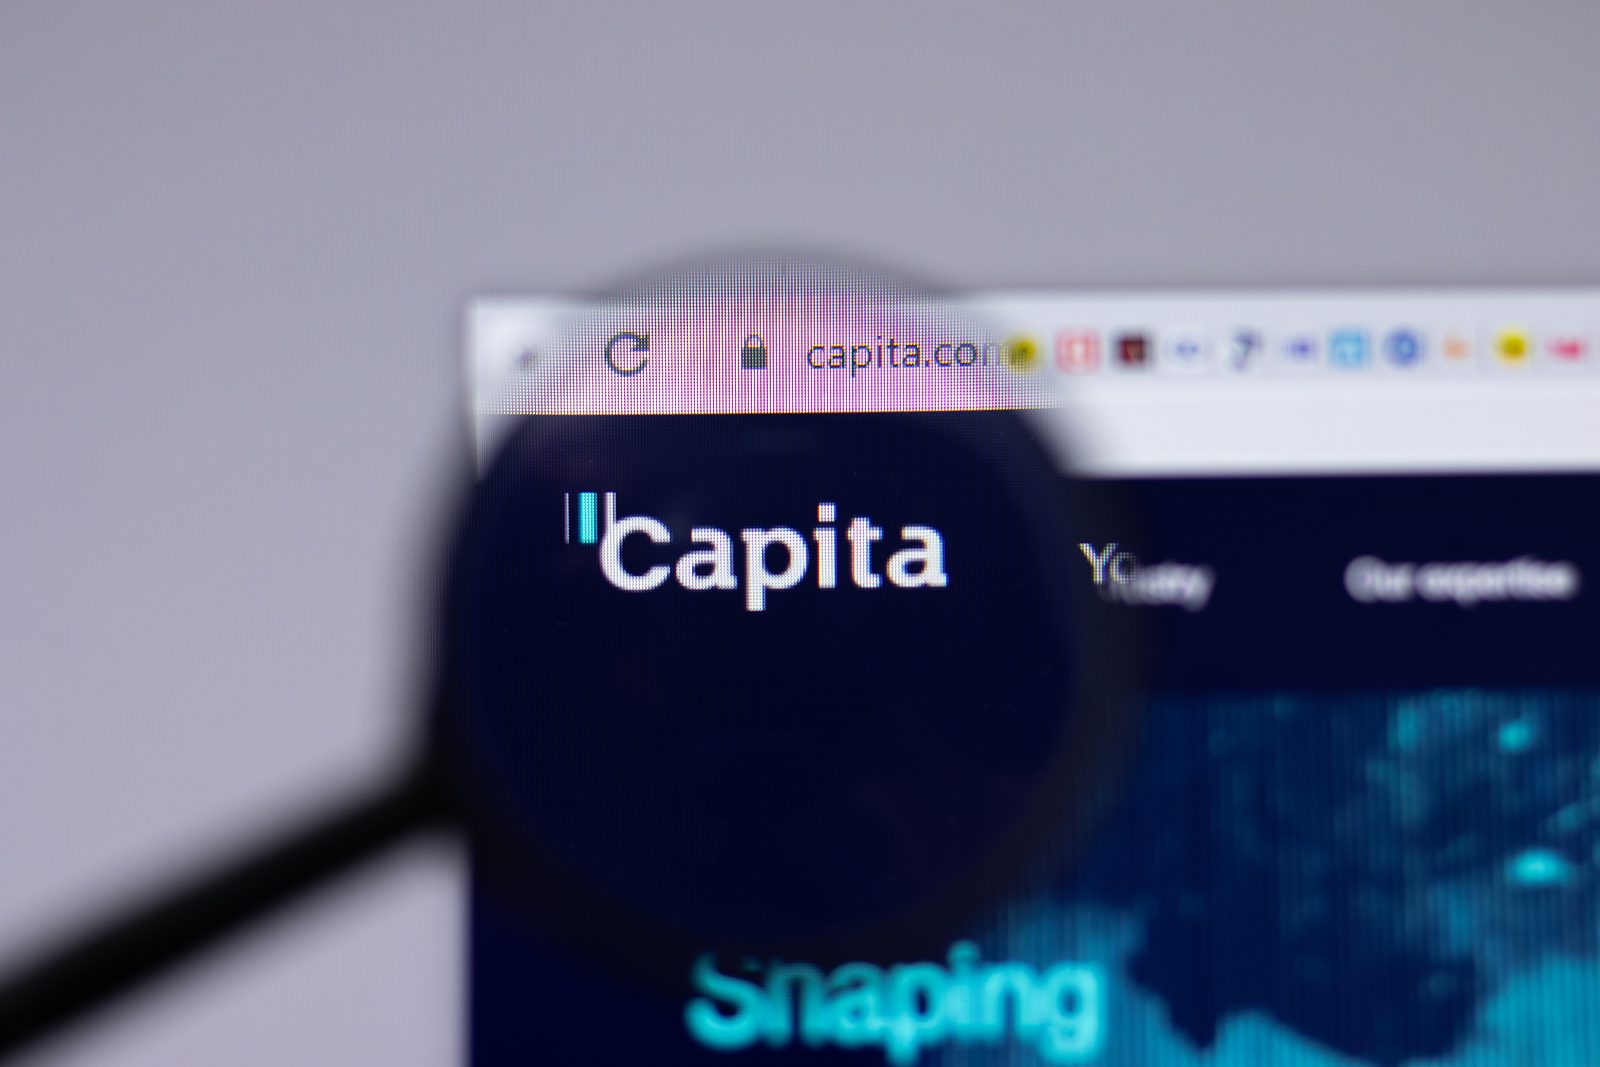 Capita Confirms Data Breach After Ransomware Group Offers to Sell Stolen Information – Source: www.securityweek.com – Author: Eduard Kovacs –